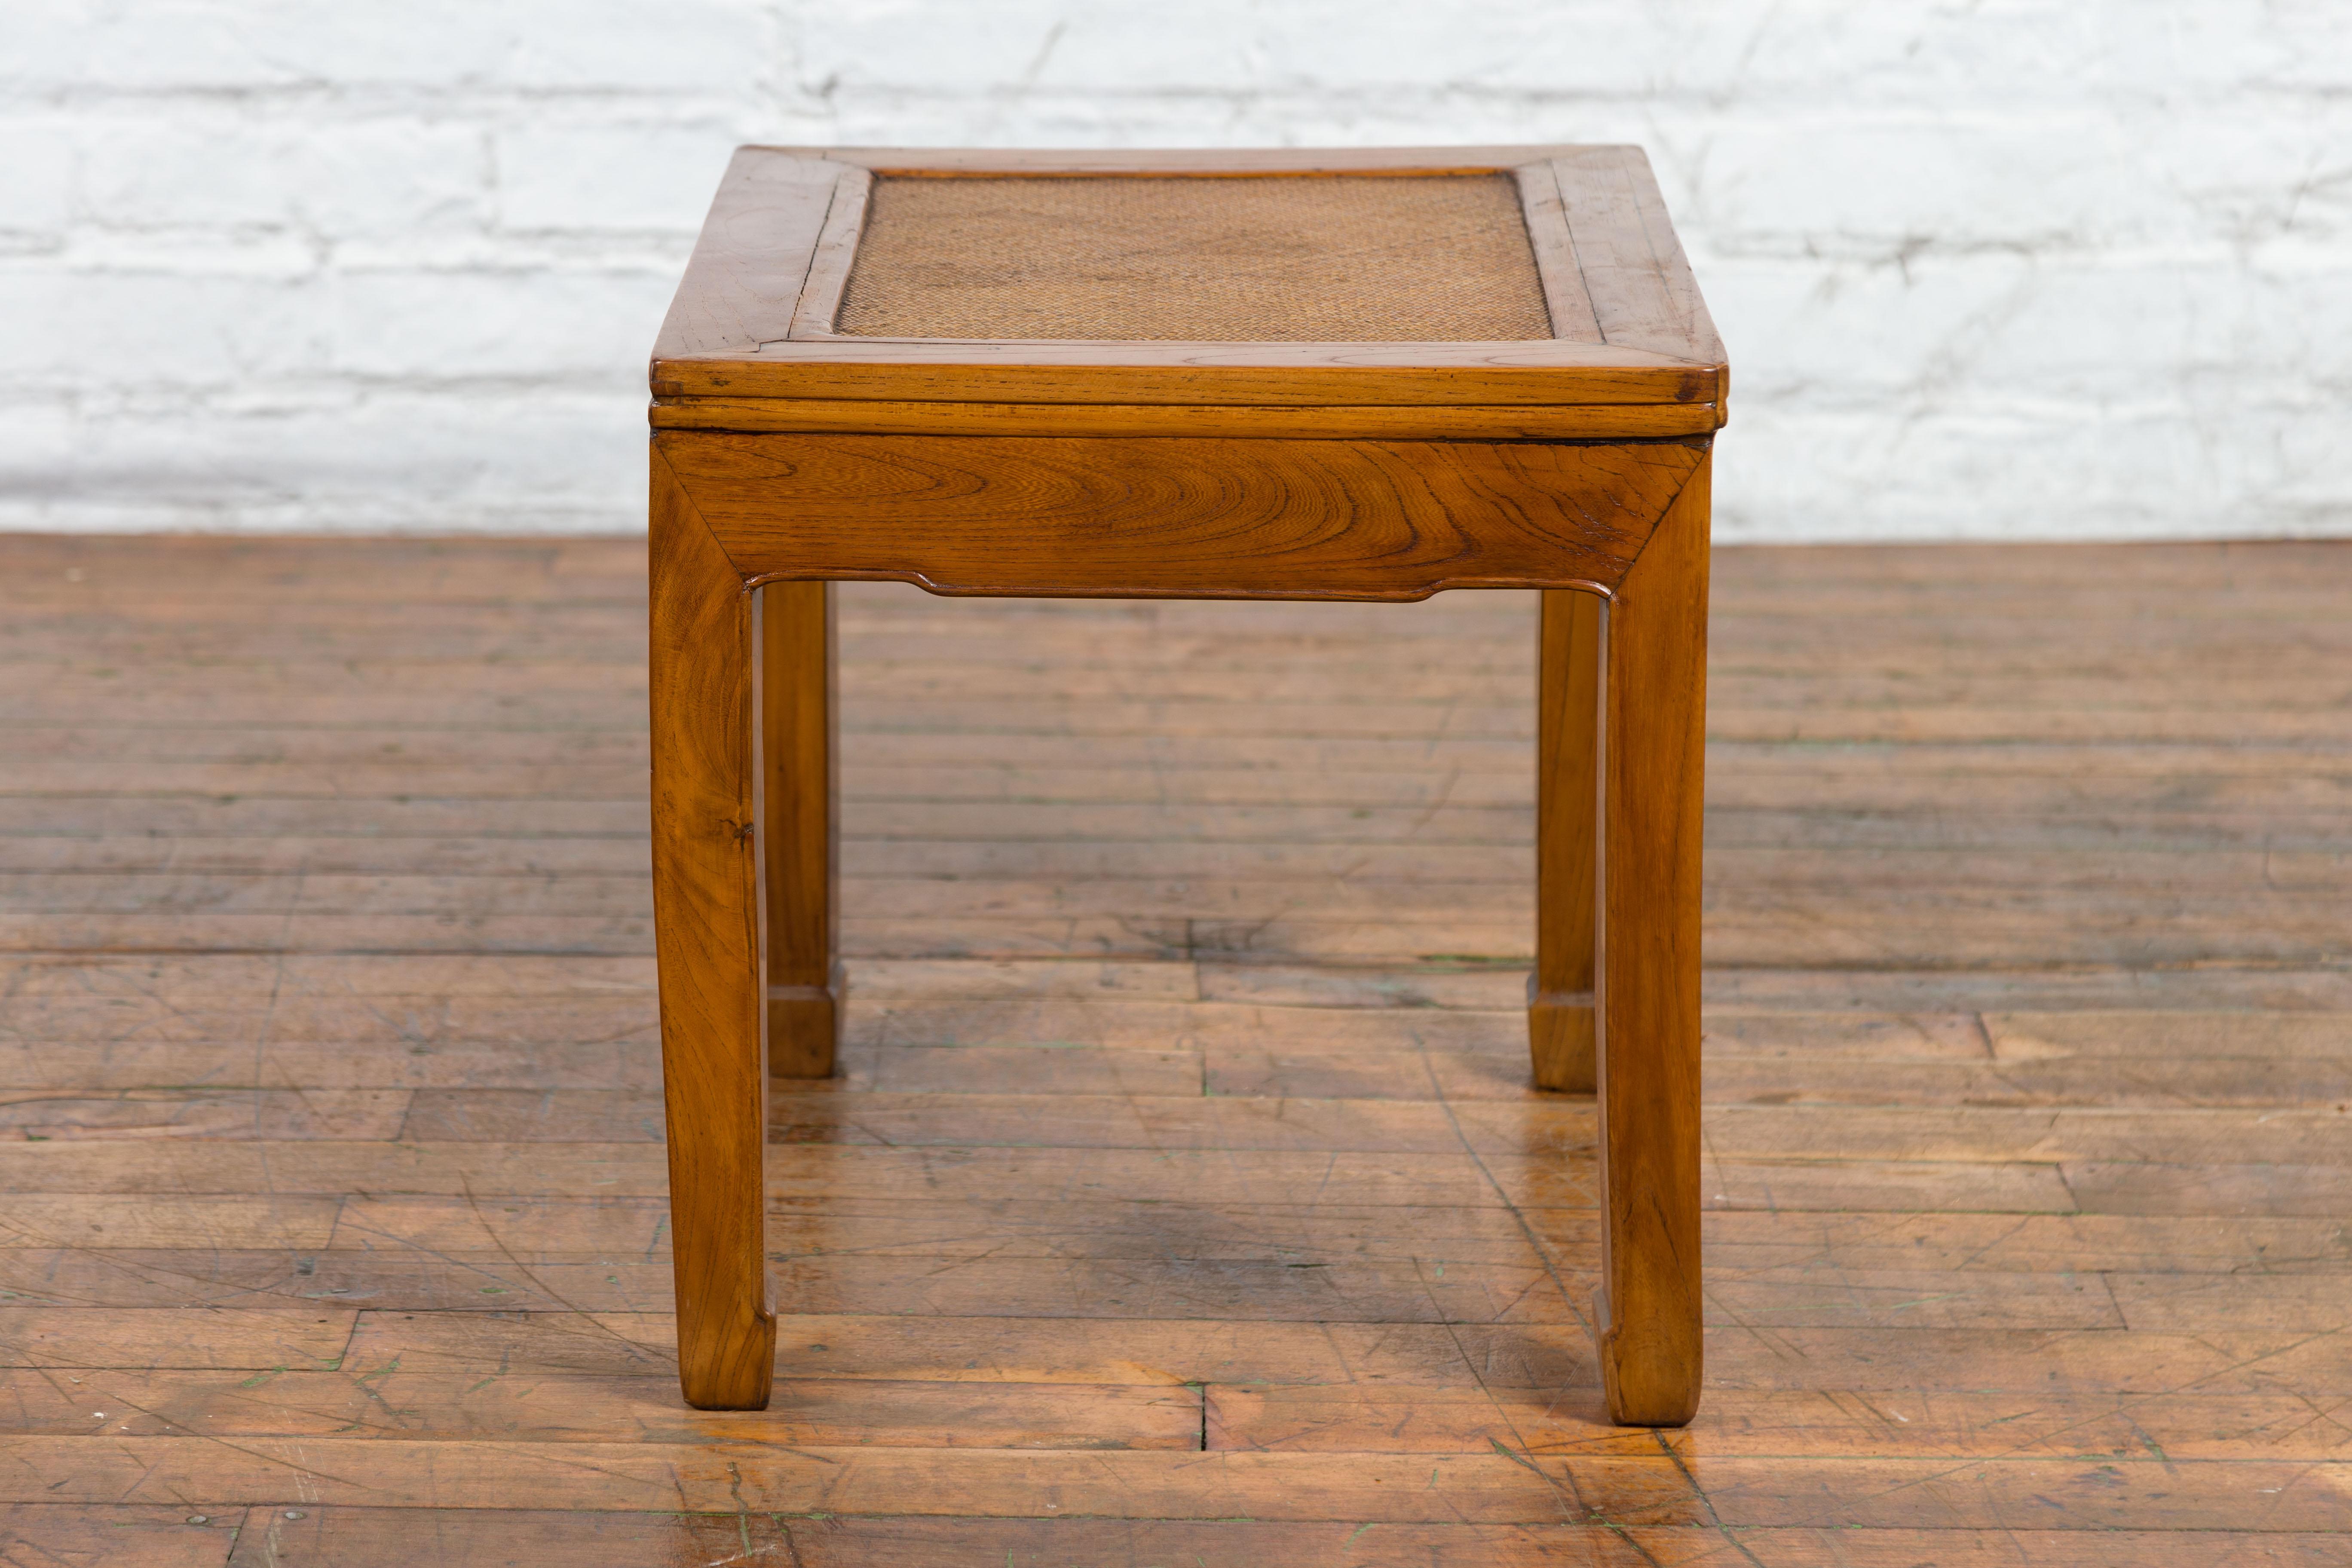 Chinese Late Qing Dynasty Side Table with Woven Rattan Top and Horse Hoof Feet For Sale 10